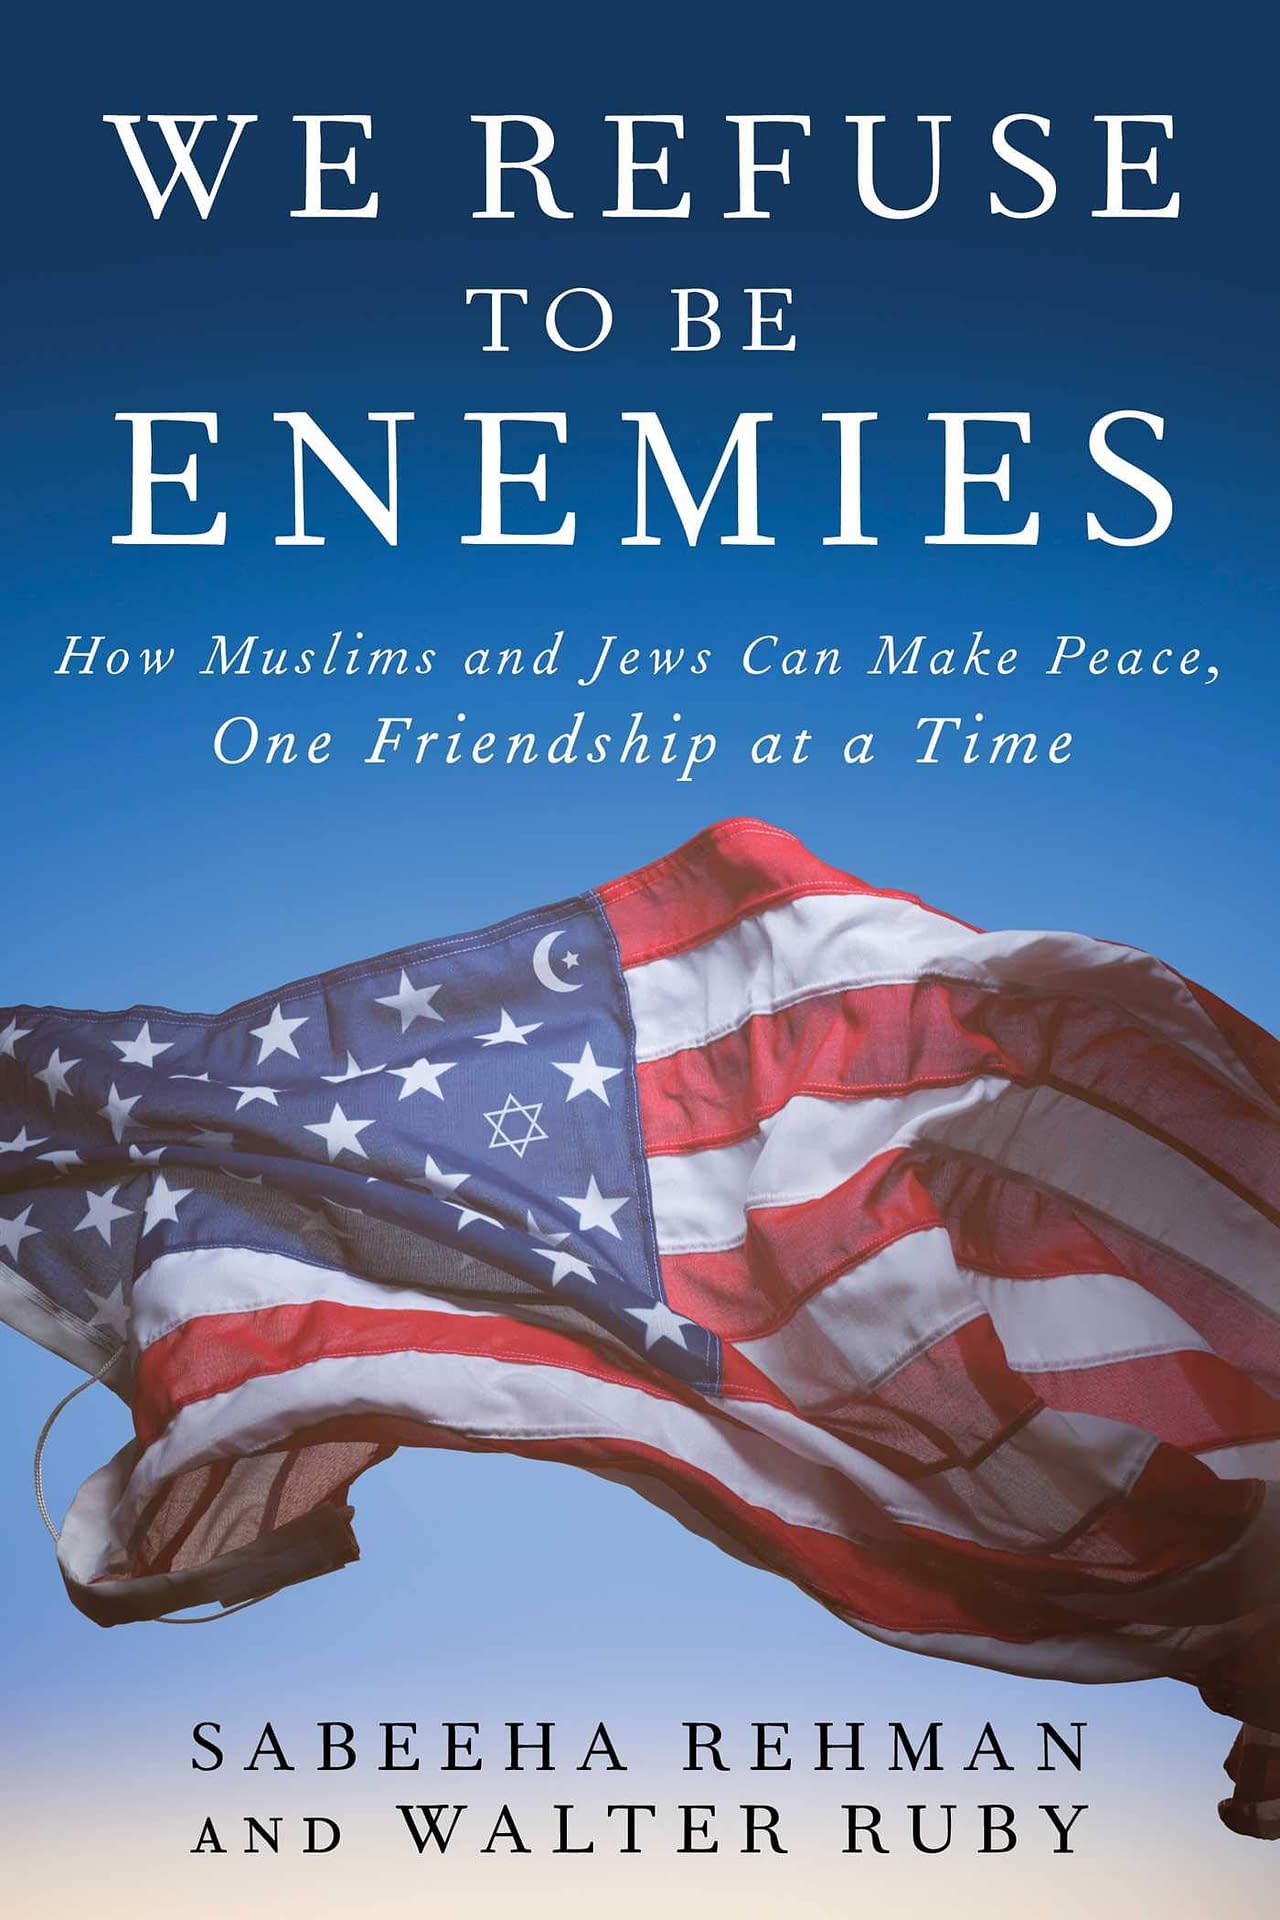 We Refuse to be Enemies: How Muslims and Jews Can Make Peace One Friendship at a Time